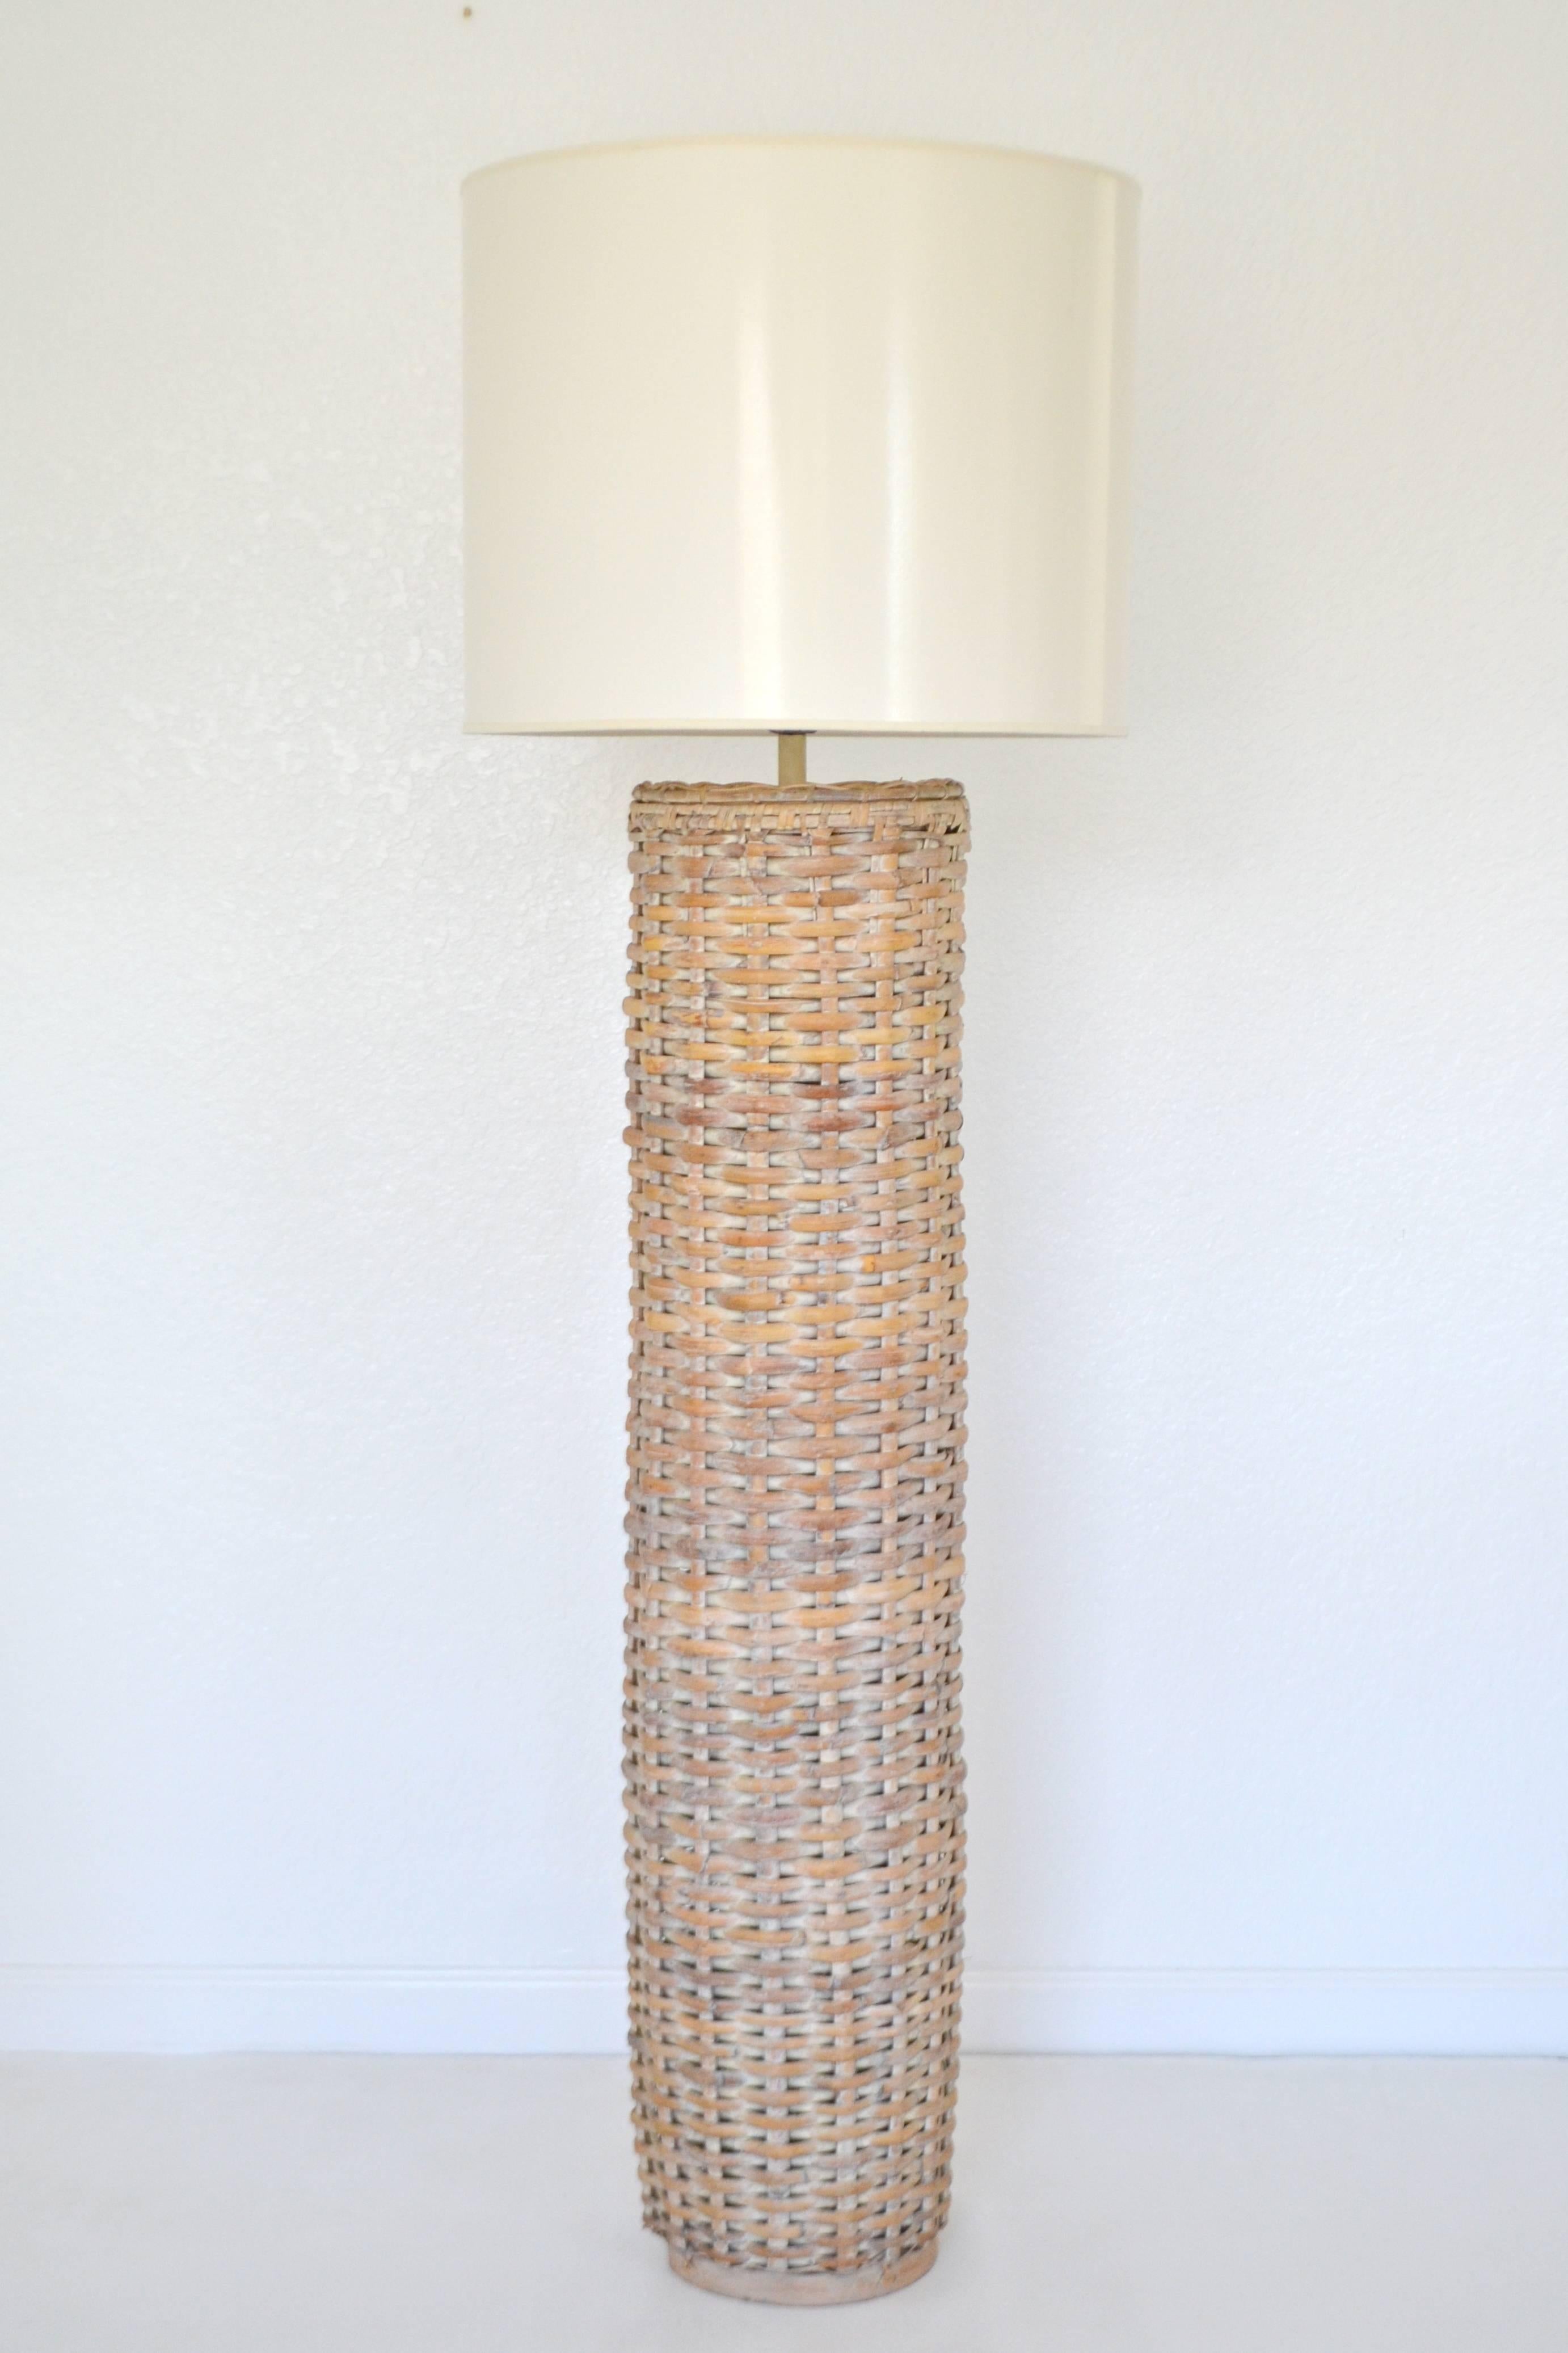 Mid-20th Century Midcentury Woven Rattan Cylinder Form Floor Lamp For Sale